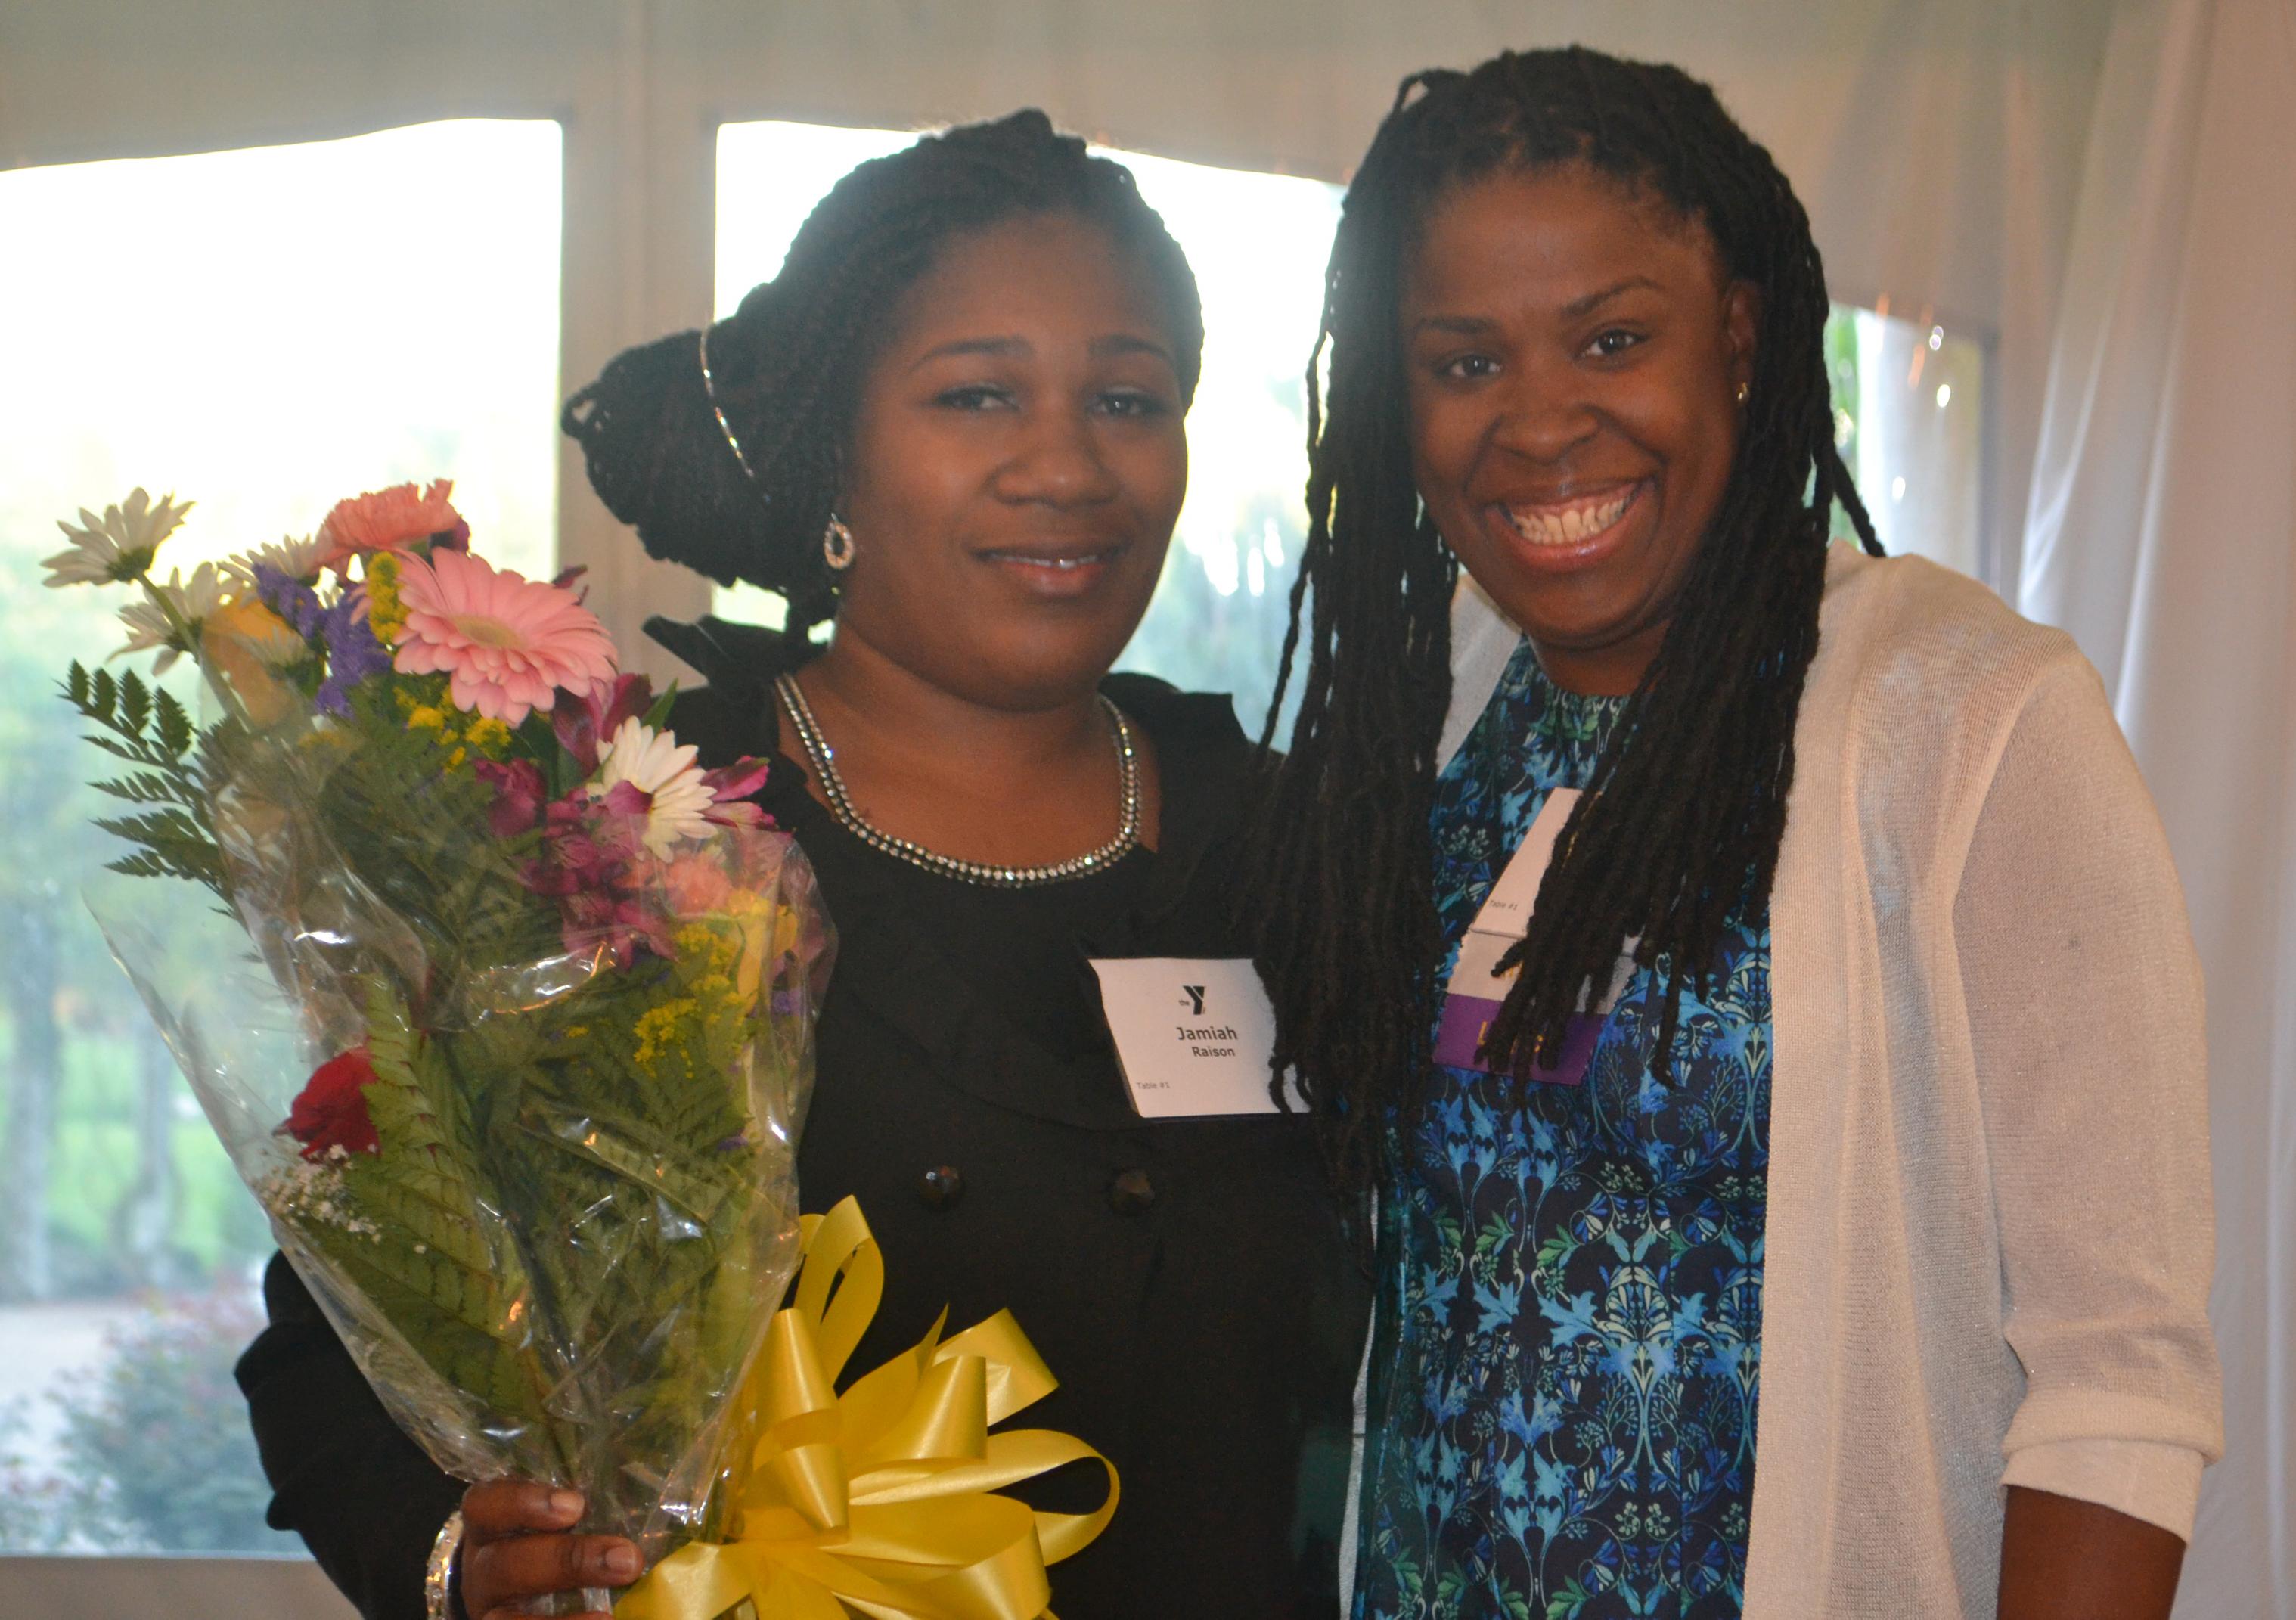 Annual Dinner - Lakeisha Harris poses with a YMCA member who recently benefited from a financial assistance offered by the YMCA.